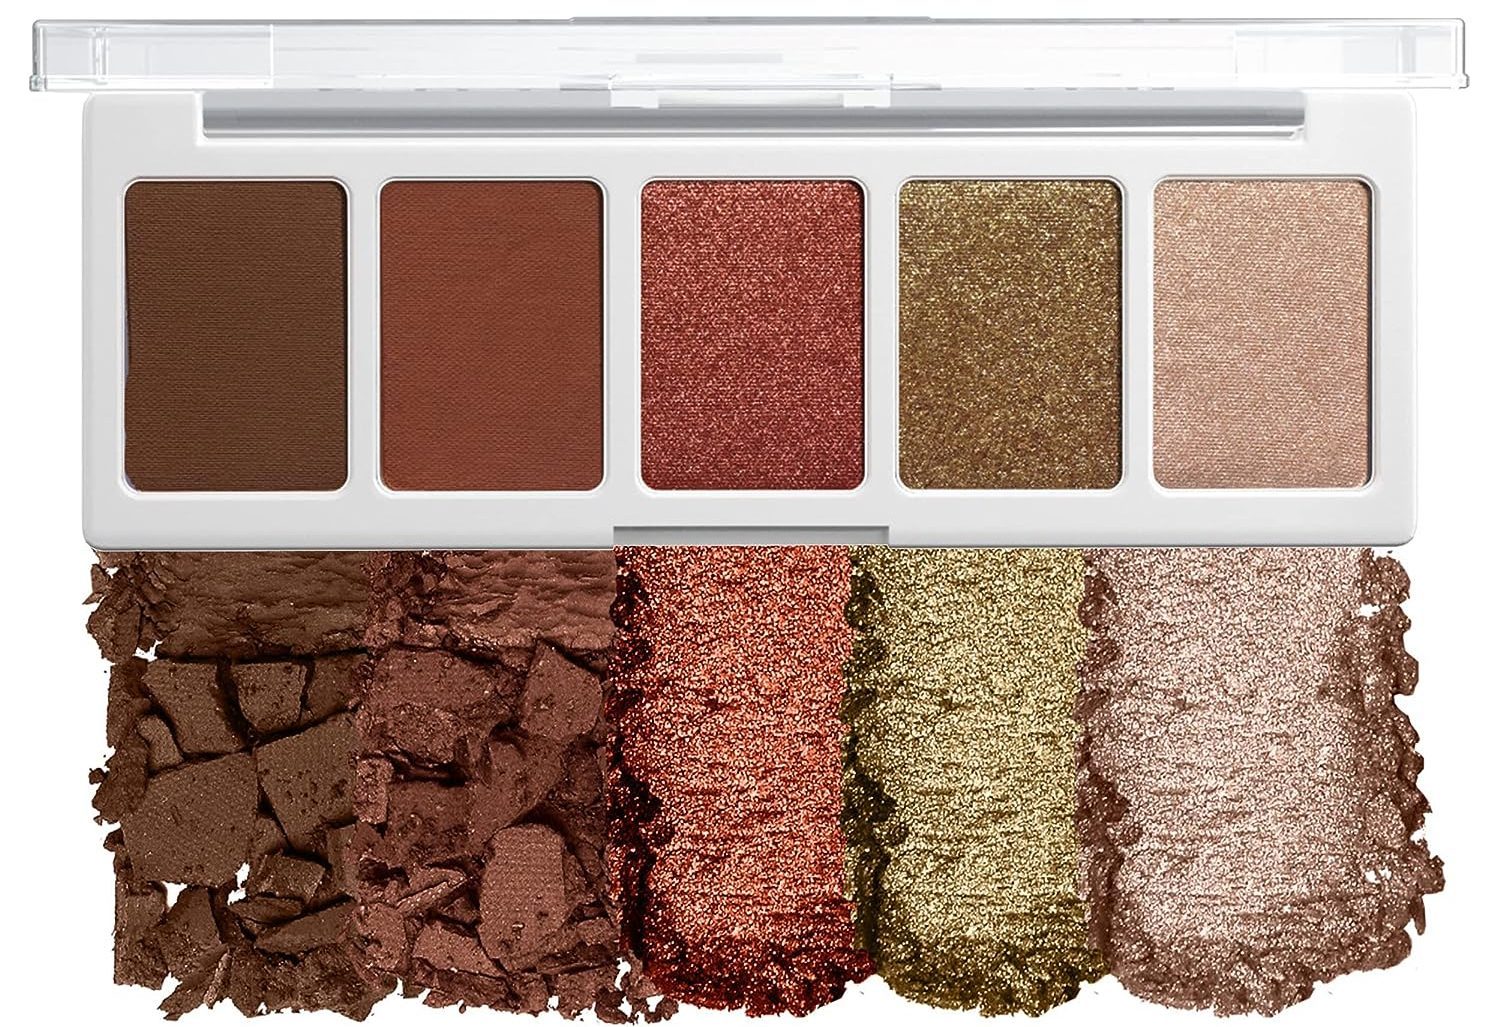 Stock image of a wet n wild palette